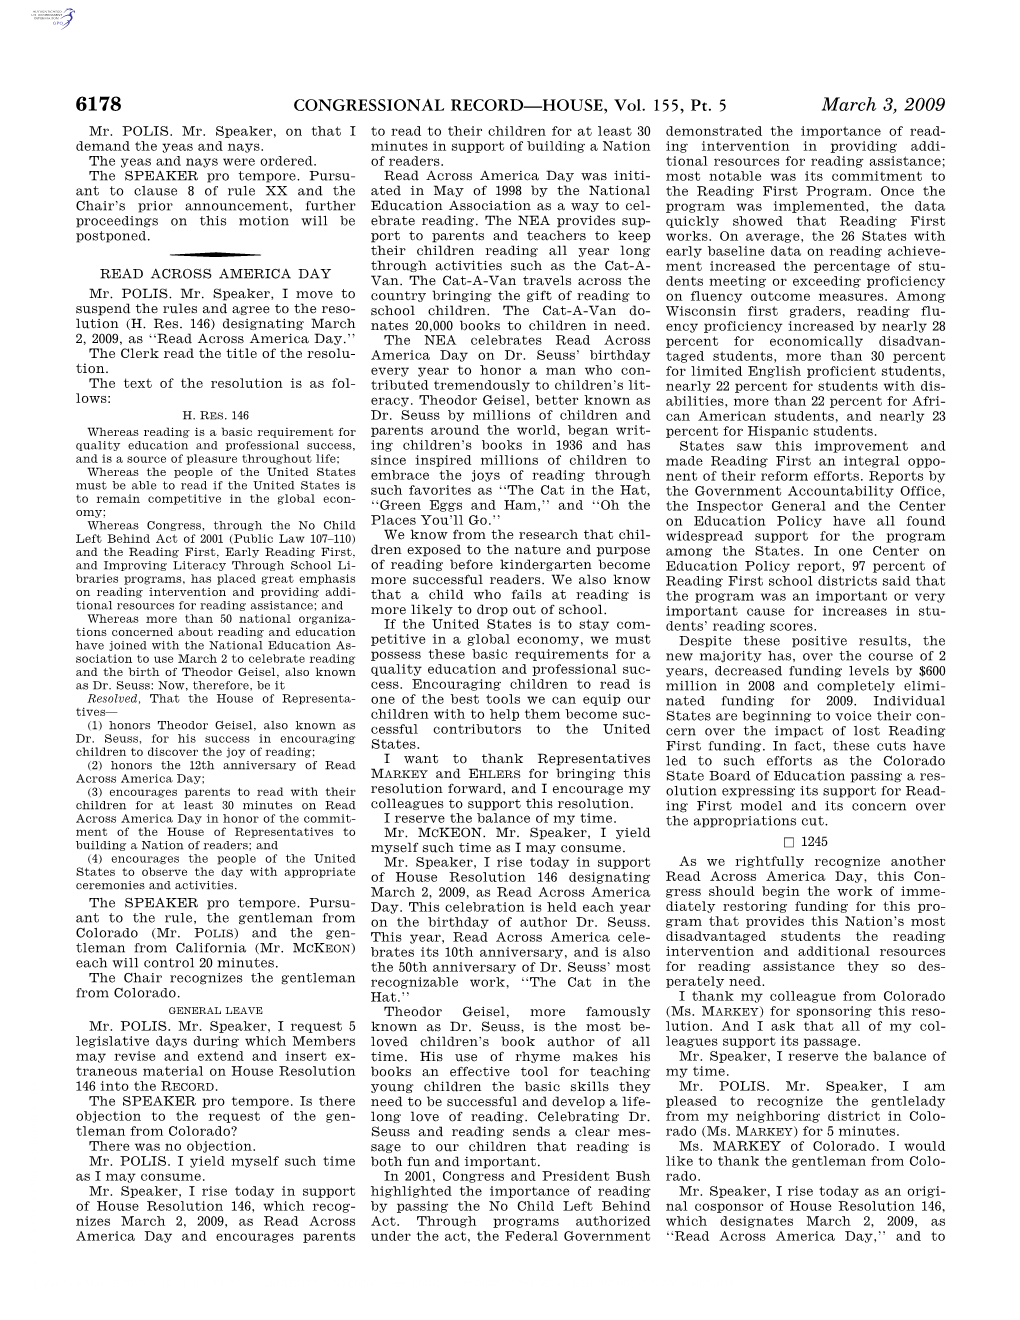 CONGRESSIONAL RECORD—HOUSE, Vol. 155, Pt. 5 March 3, 2009 Mr